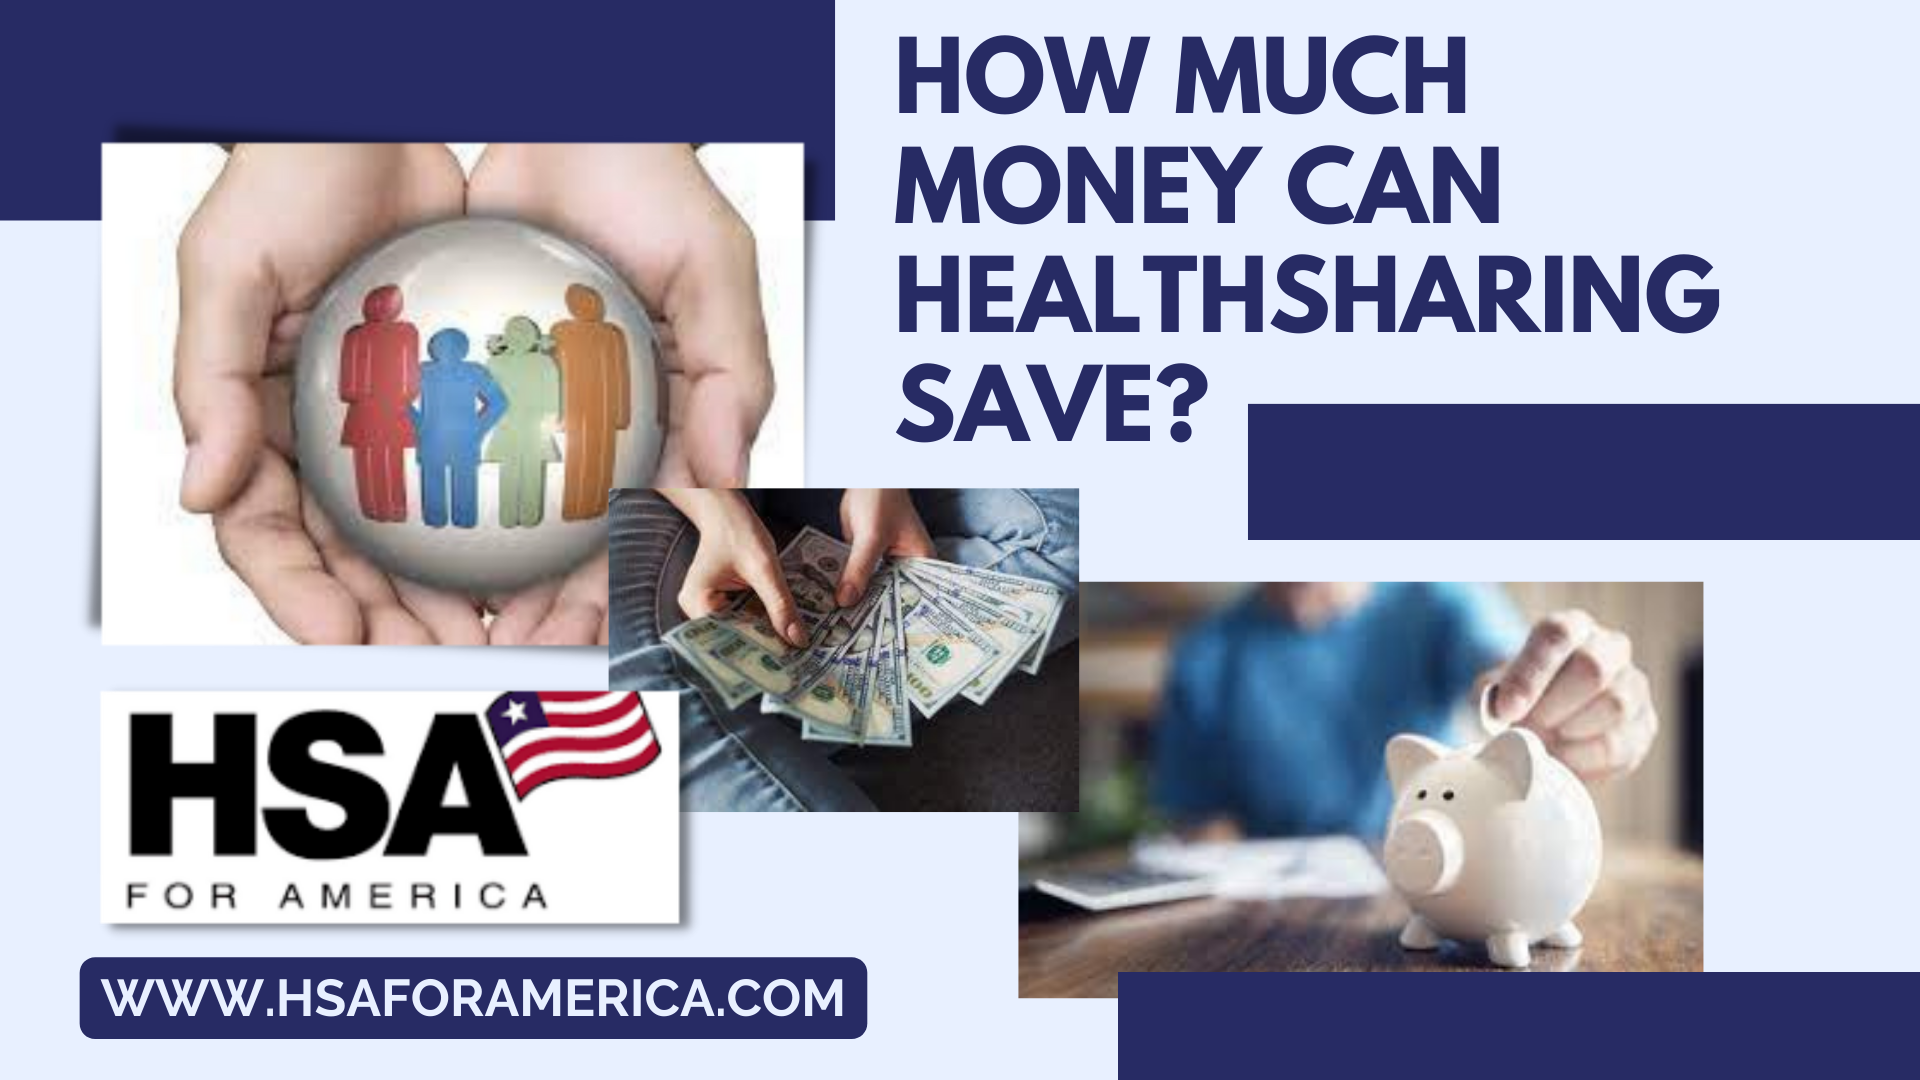 How Much Money Can Healthsharing Save